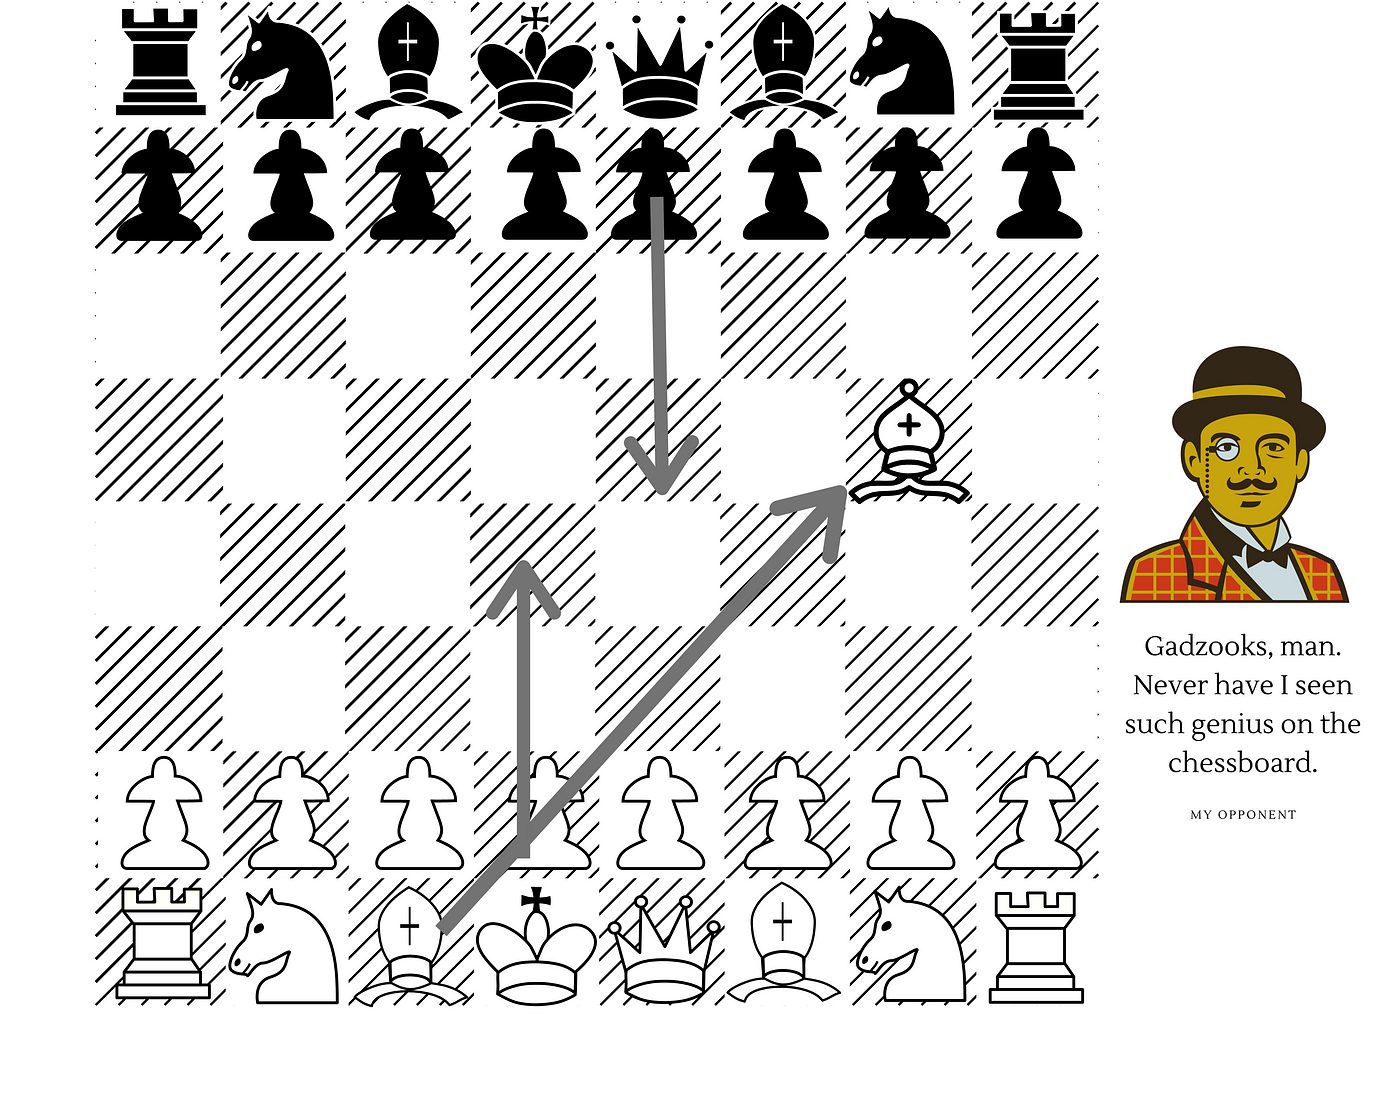 Are online chess lessons any good? - Quora